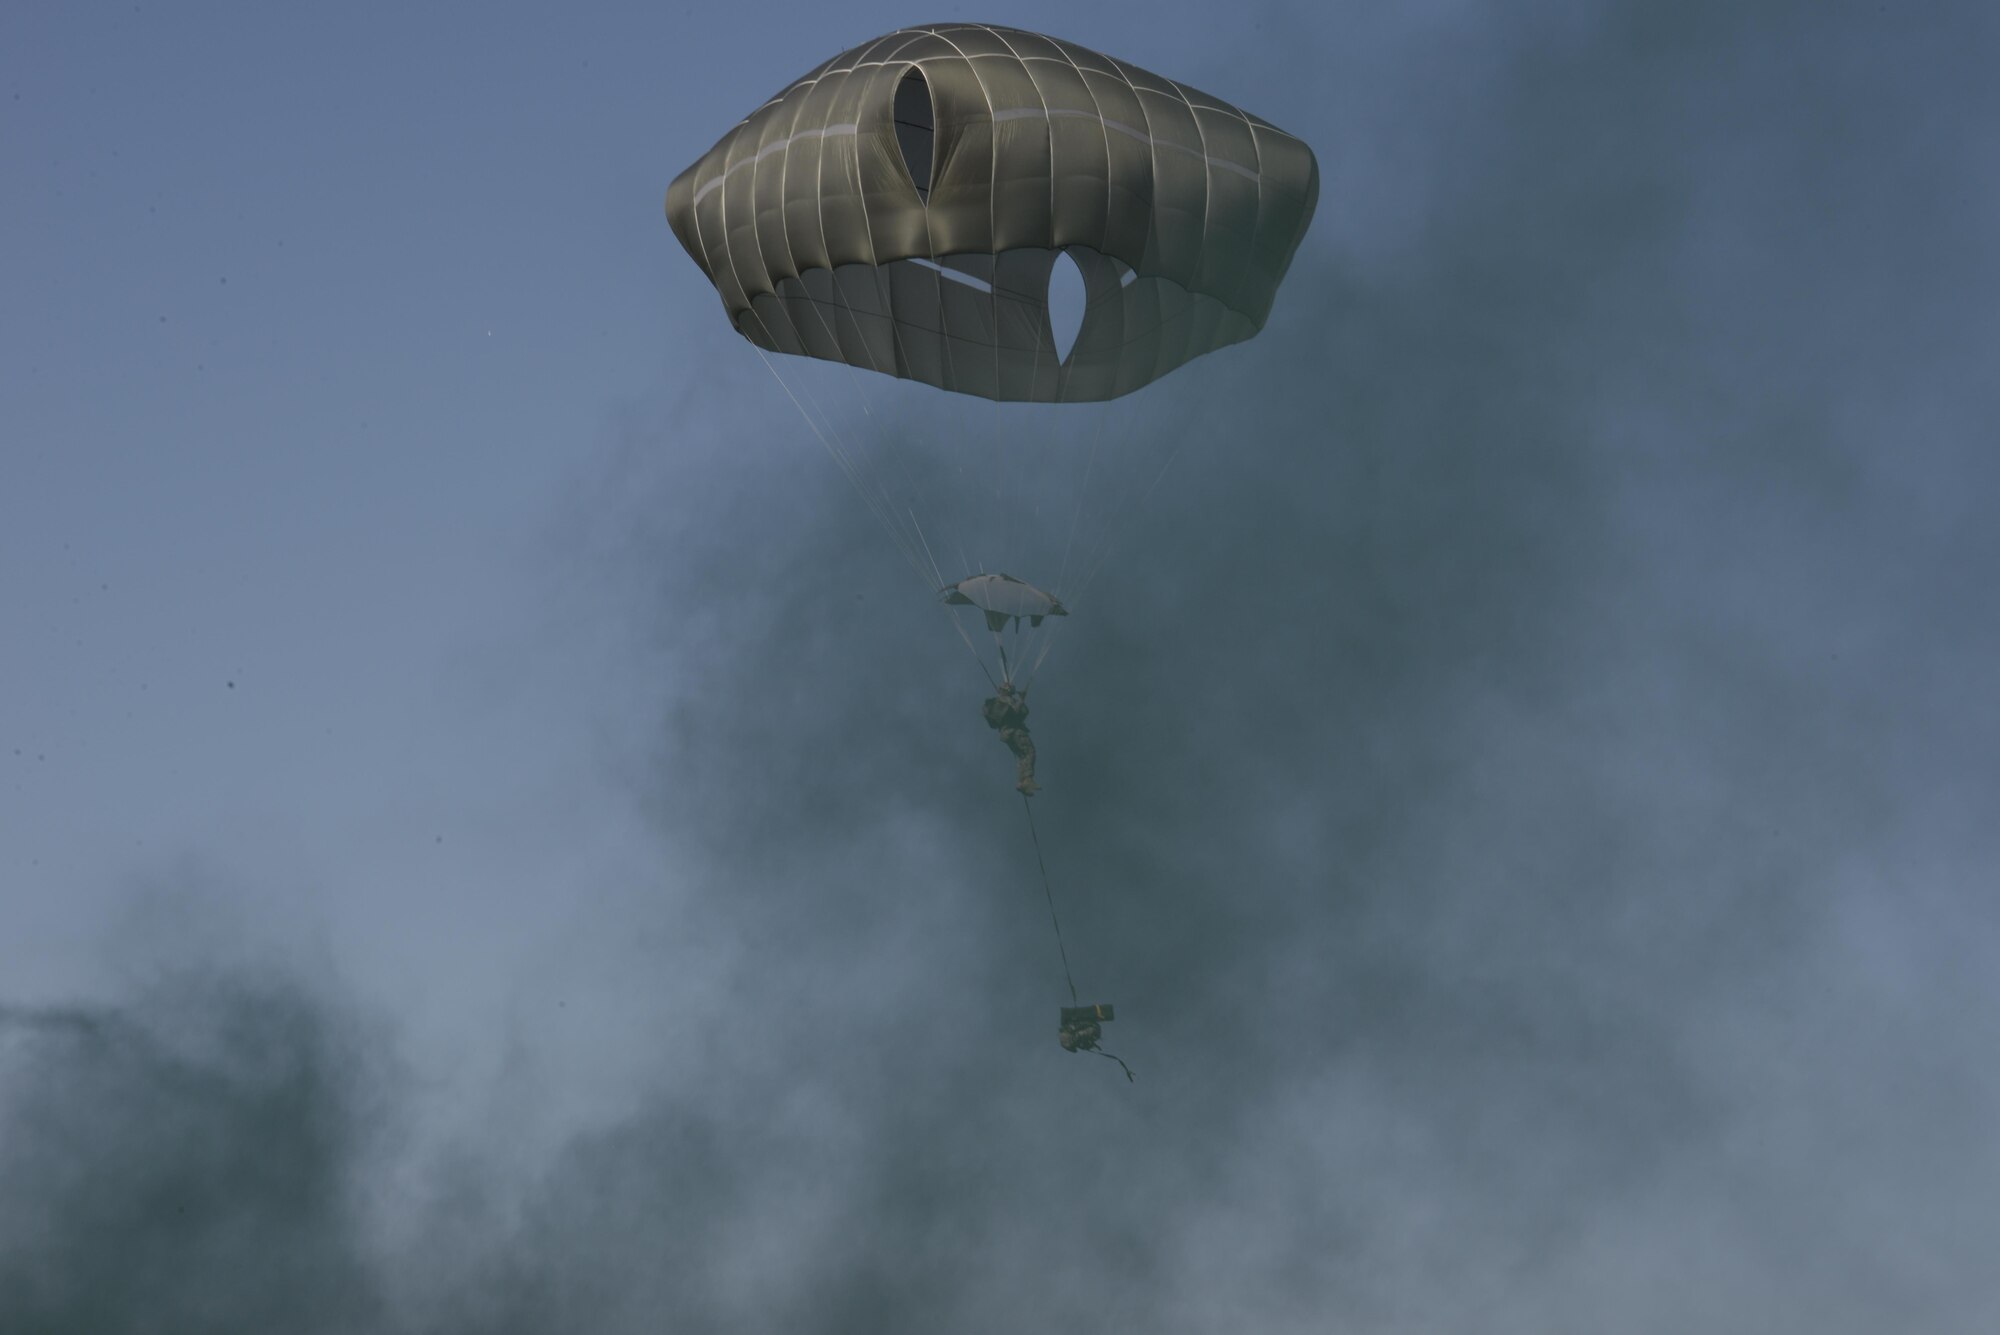 A jumper from the U.S. Army 4th Battalion, 25th Infantry Airborne floats down after jumping from a C-17 Globemaster III aircraft during exercise Talisman Sabre in Northern Territory, Australia, July 8, 2015. Exercises such as Talisman Sabre offer a uniquely complex and challenging multinational environment for our forces to hone their skills. (U.S. Air Force photo by Senior Airman Stephen G. Eigel)